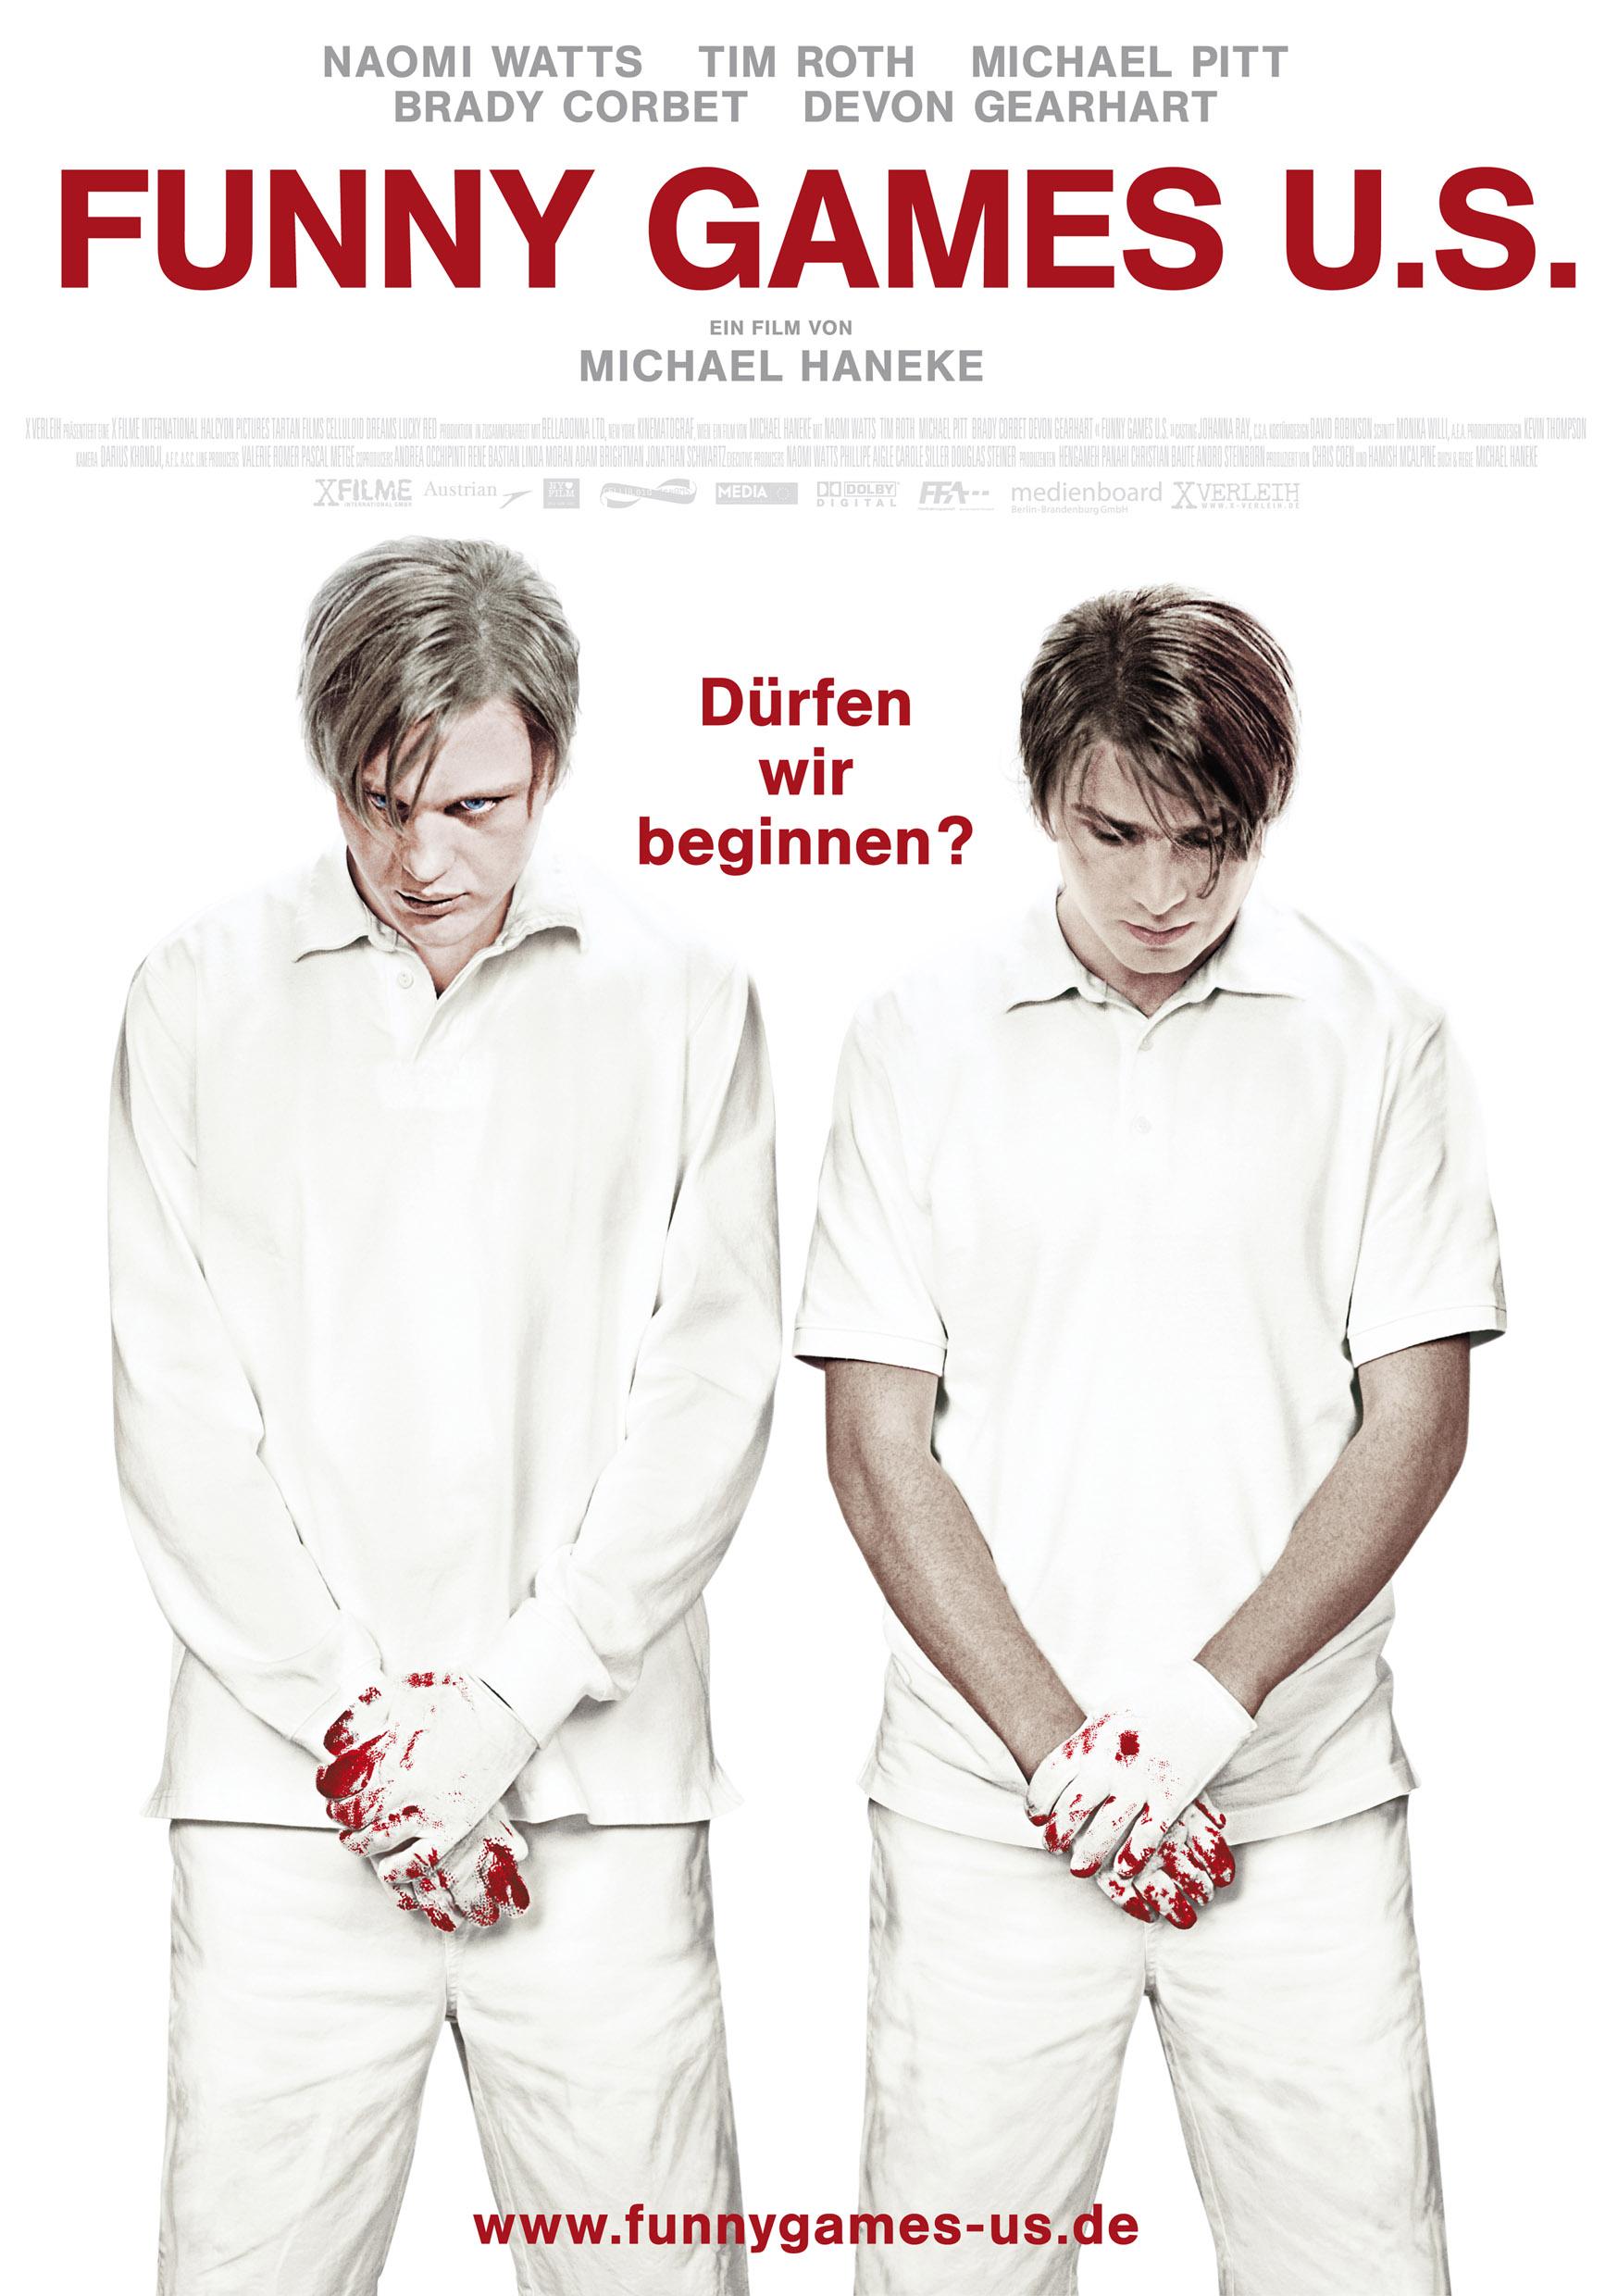 Funny Games U.S. (Poster)